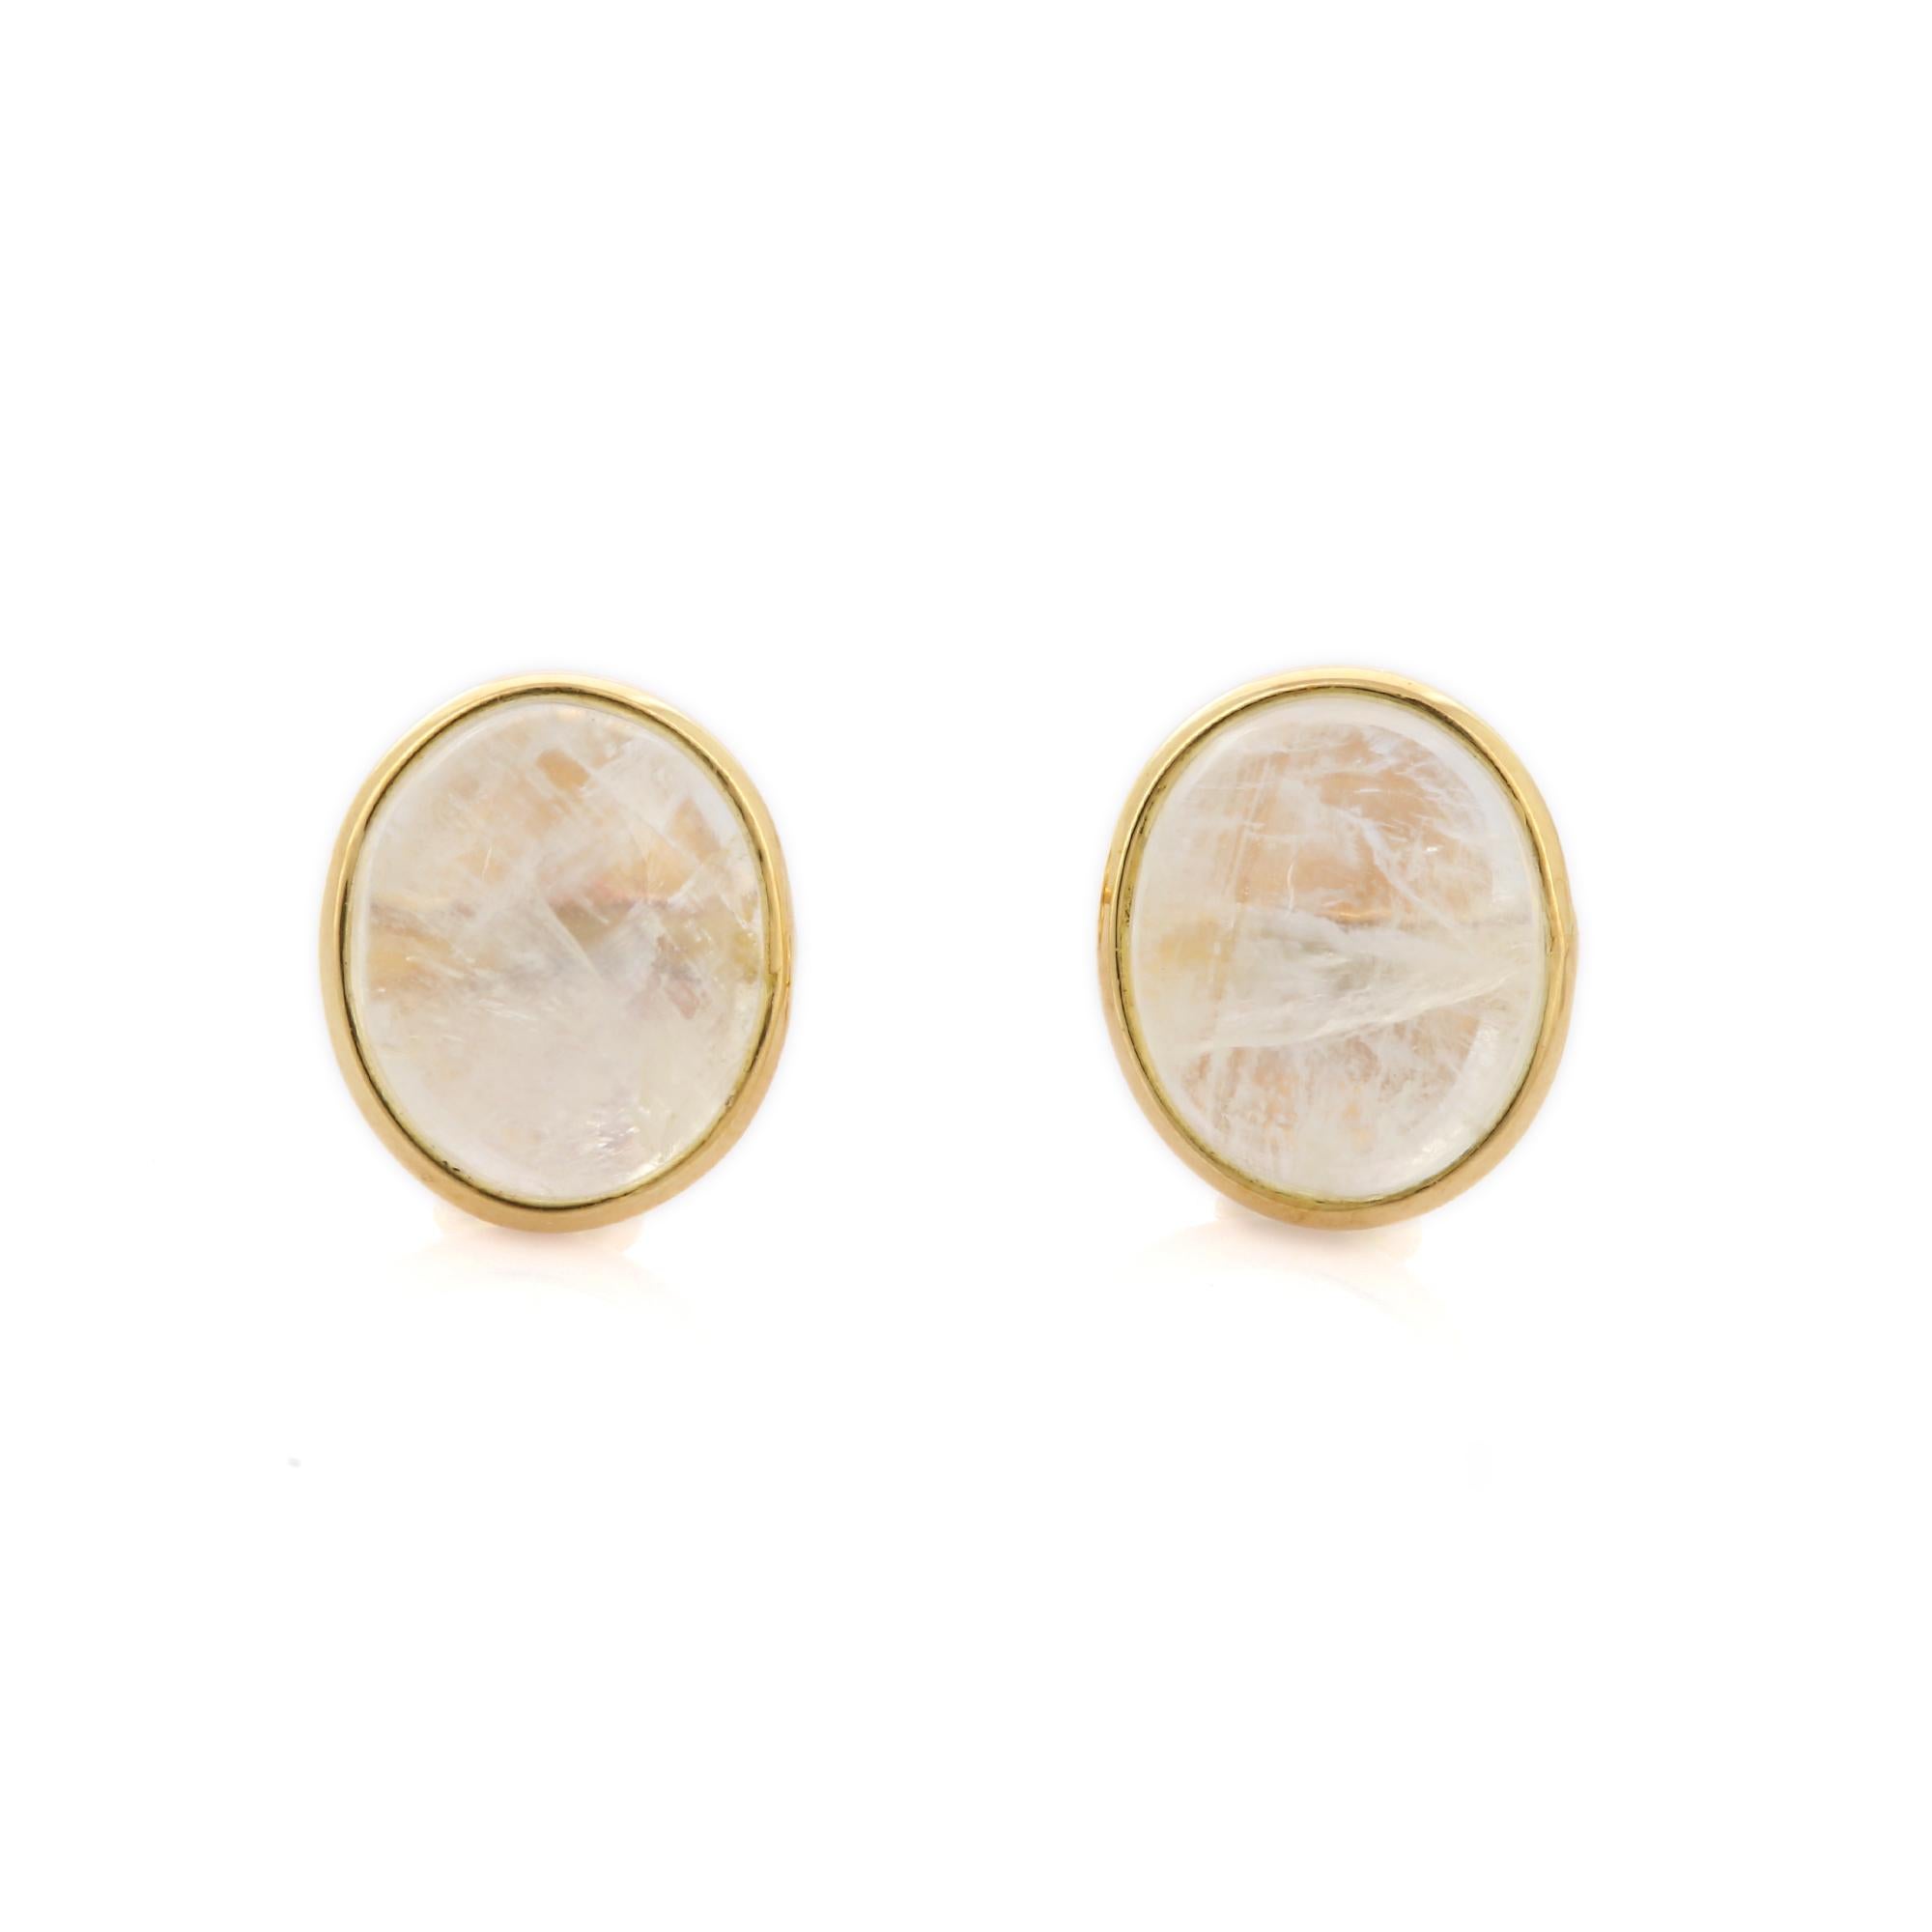 10.6 Ct Rose Moonstone Pierced Earrings in 18K Yellow Gold In New Condition For Sale In Houston, TX